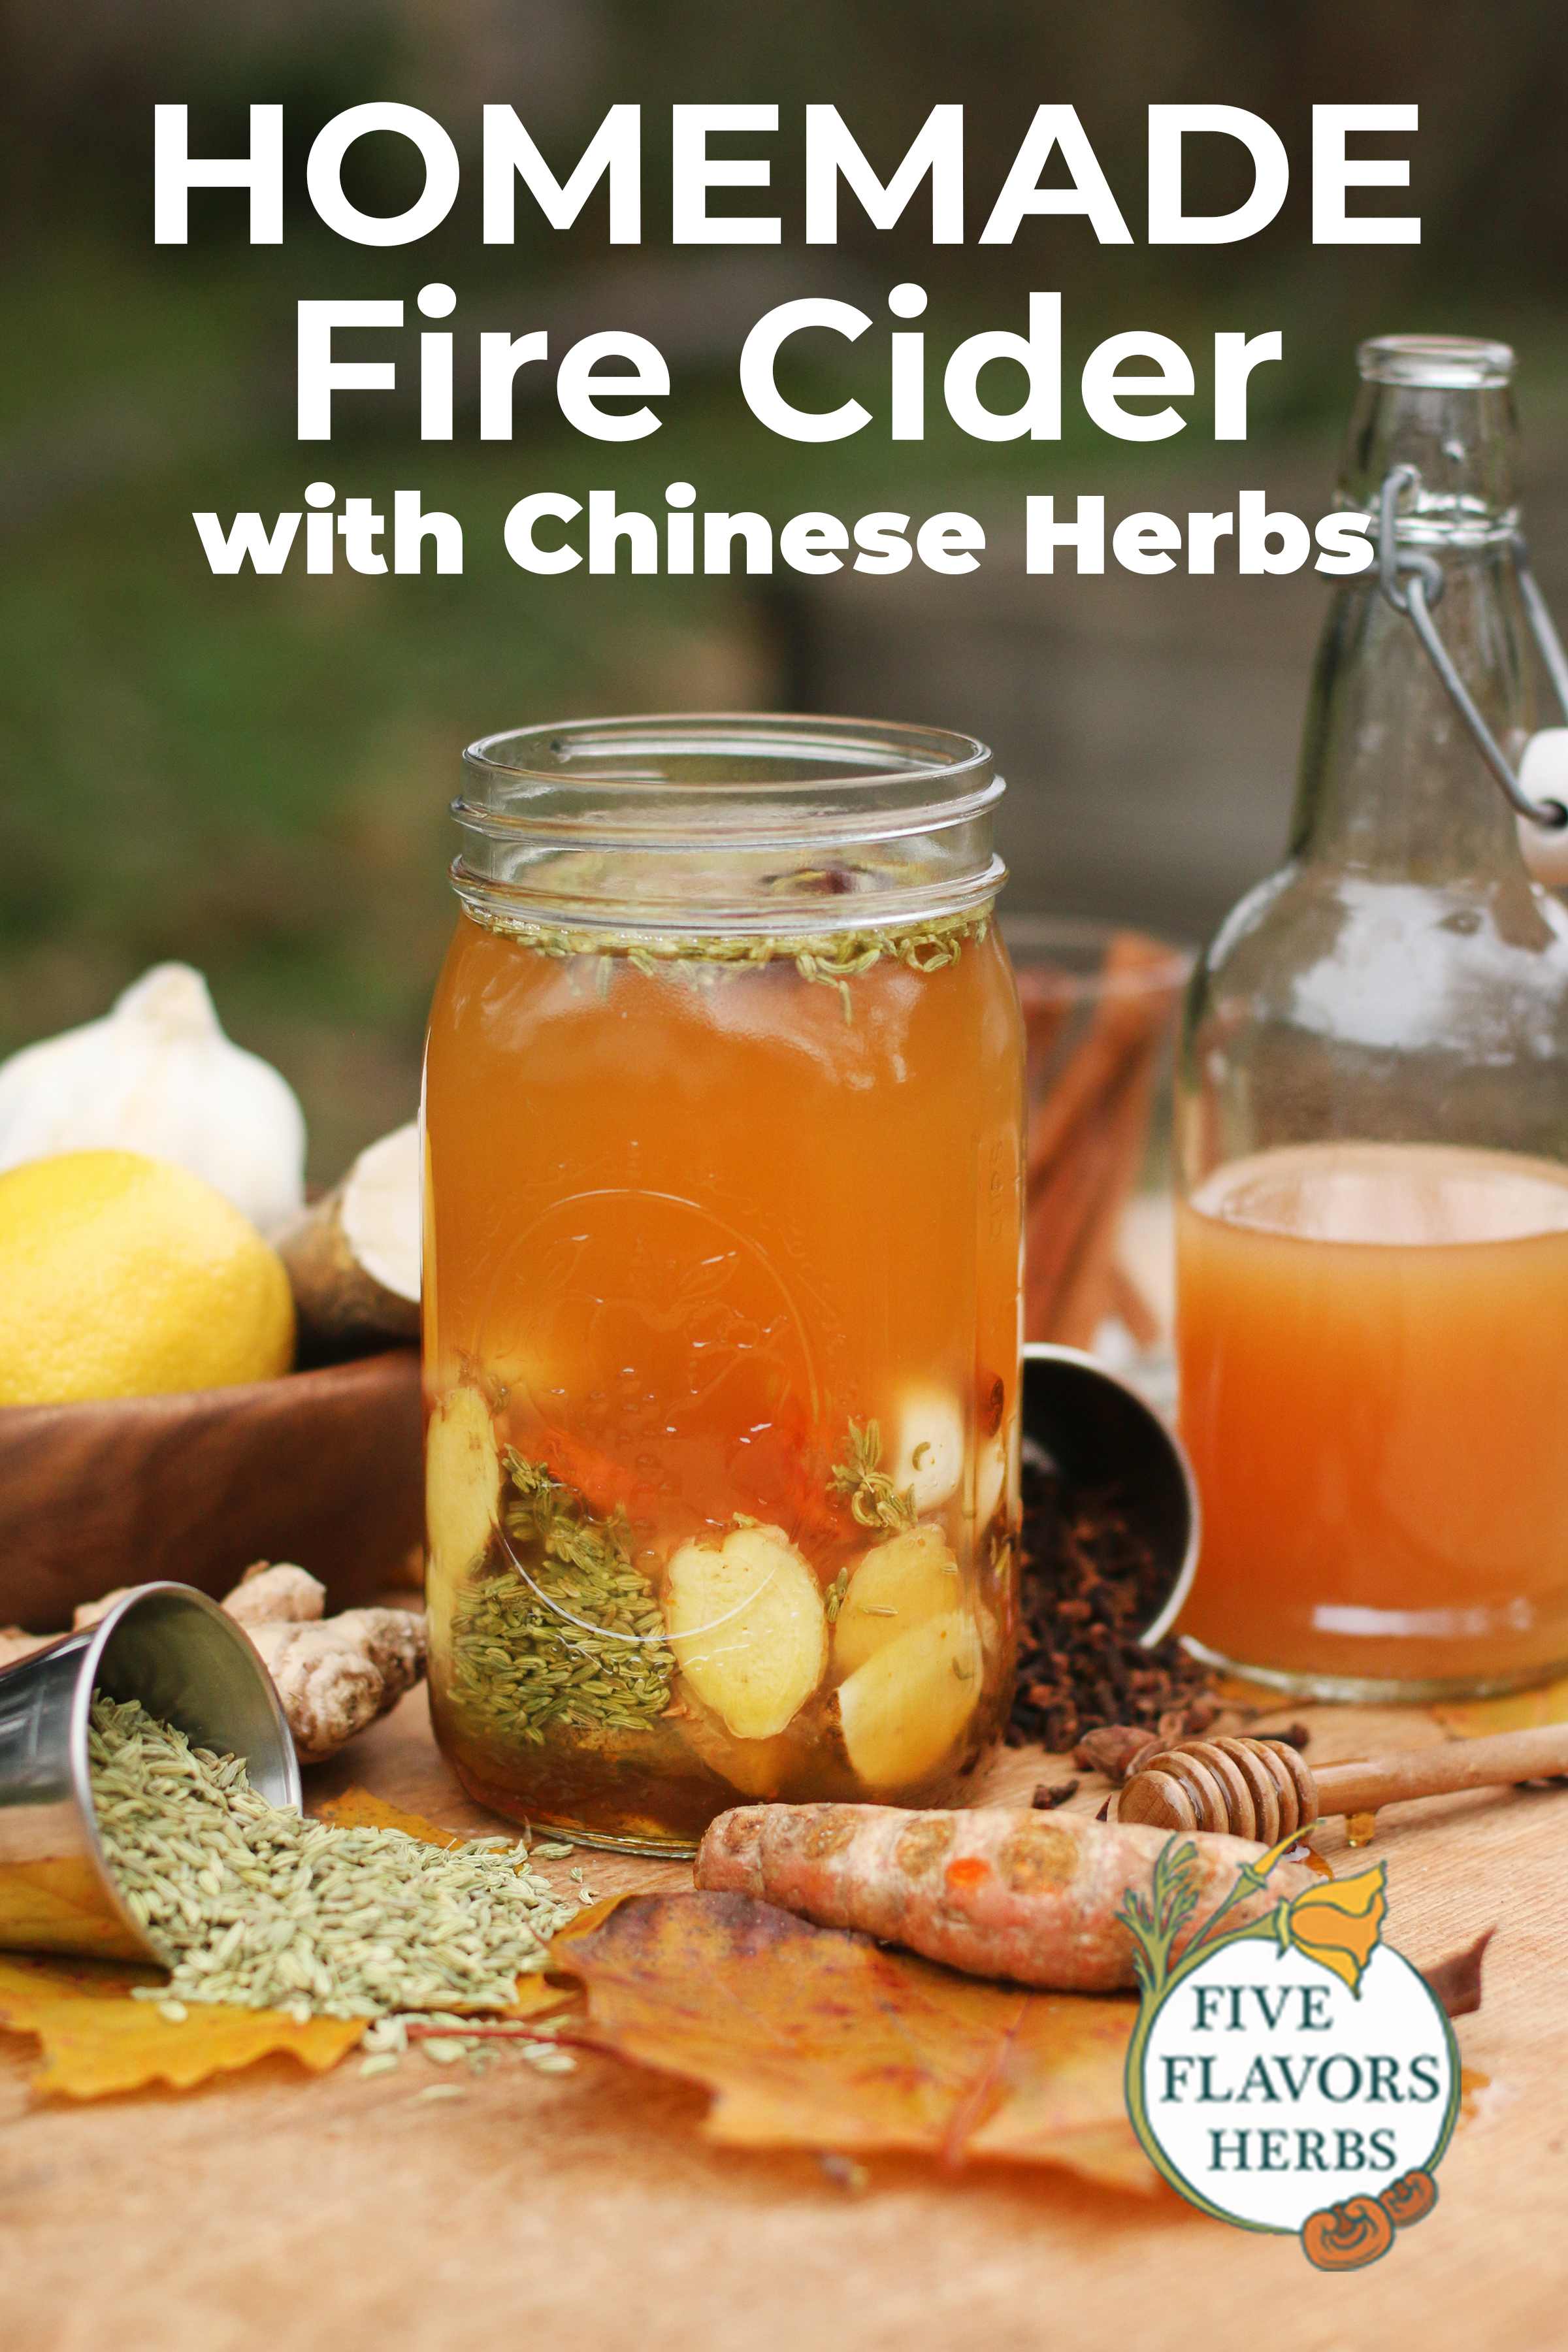 Homemade-fire-cider-Chinese-five-spice-recipe-from-Five-Flavors-Herbs